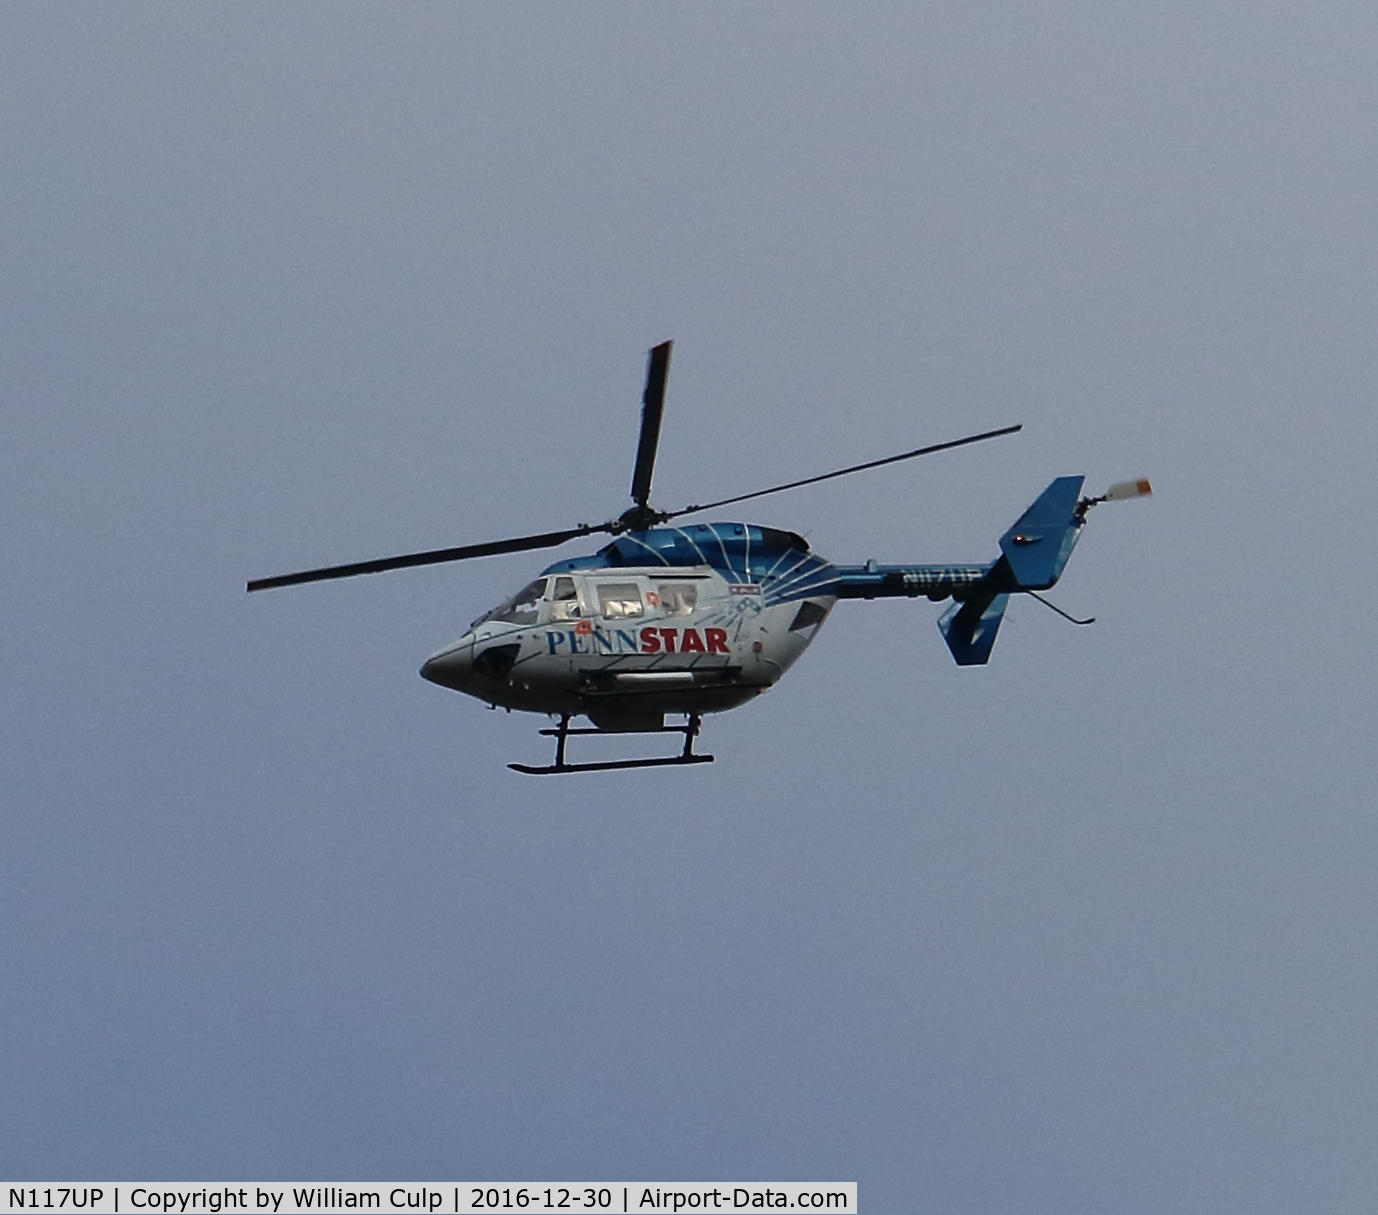 N117UP, 1994 Eurocopter-Kawasaki BK-117C-1 C/N 7508, Saw it flying North over Peace Valley Park, Bucks County Pa. maybe heading to Lehigh Valley Hospital in Allentown, Pa.